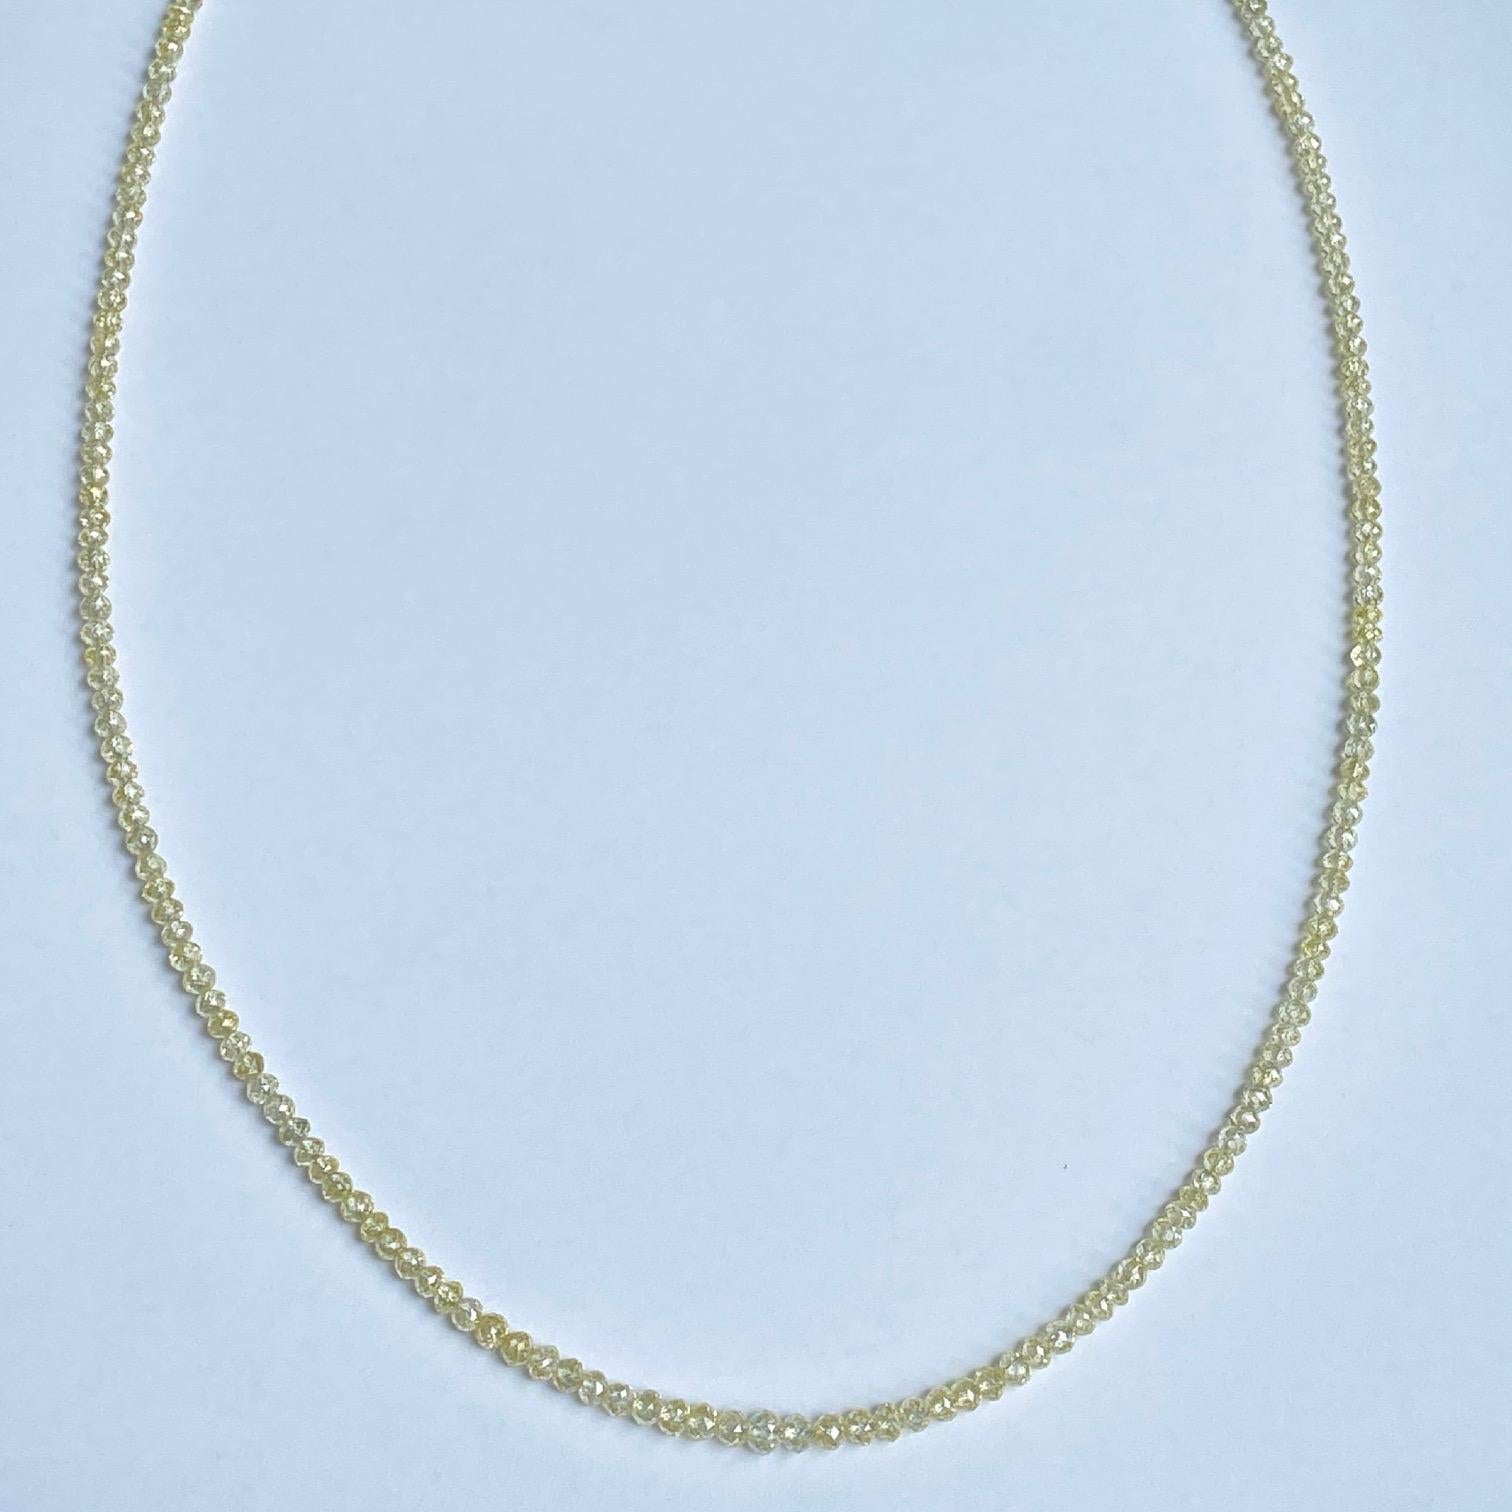 An 18 inch strand of 23.83 ctw yellow faceted diamond beads, with an 18k white gold diamond clasp. This strand was made and designed by llyn strong.